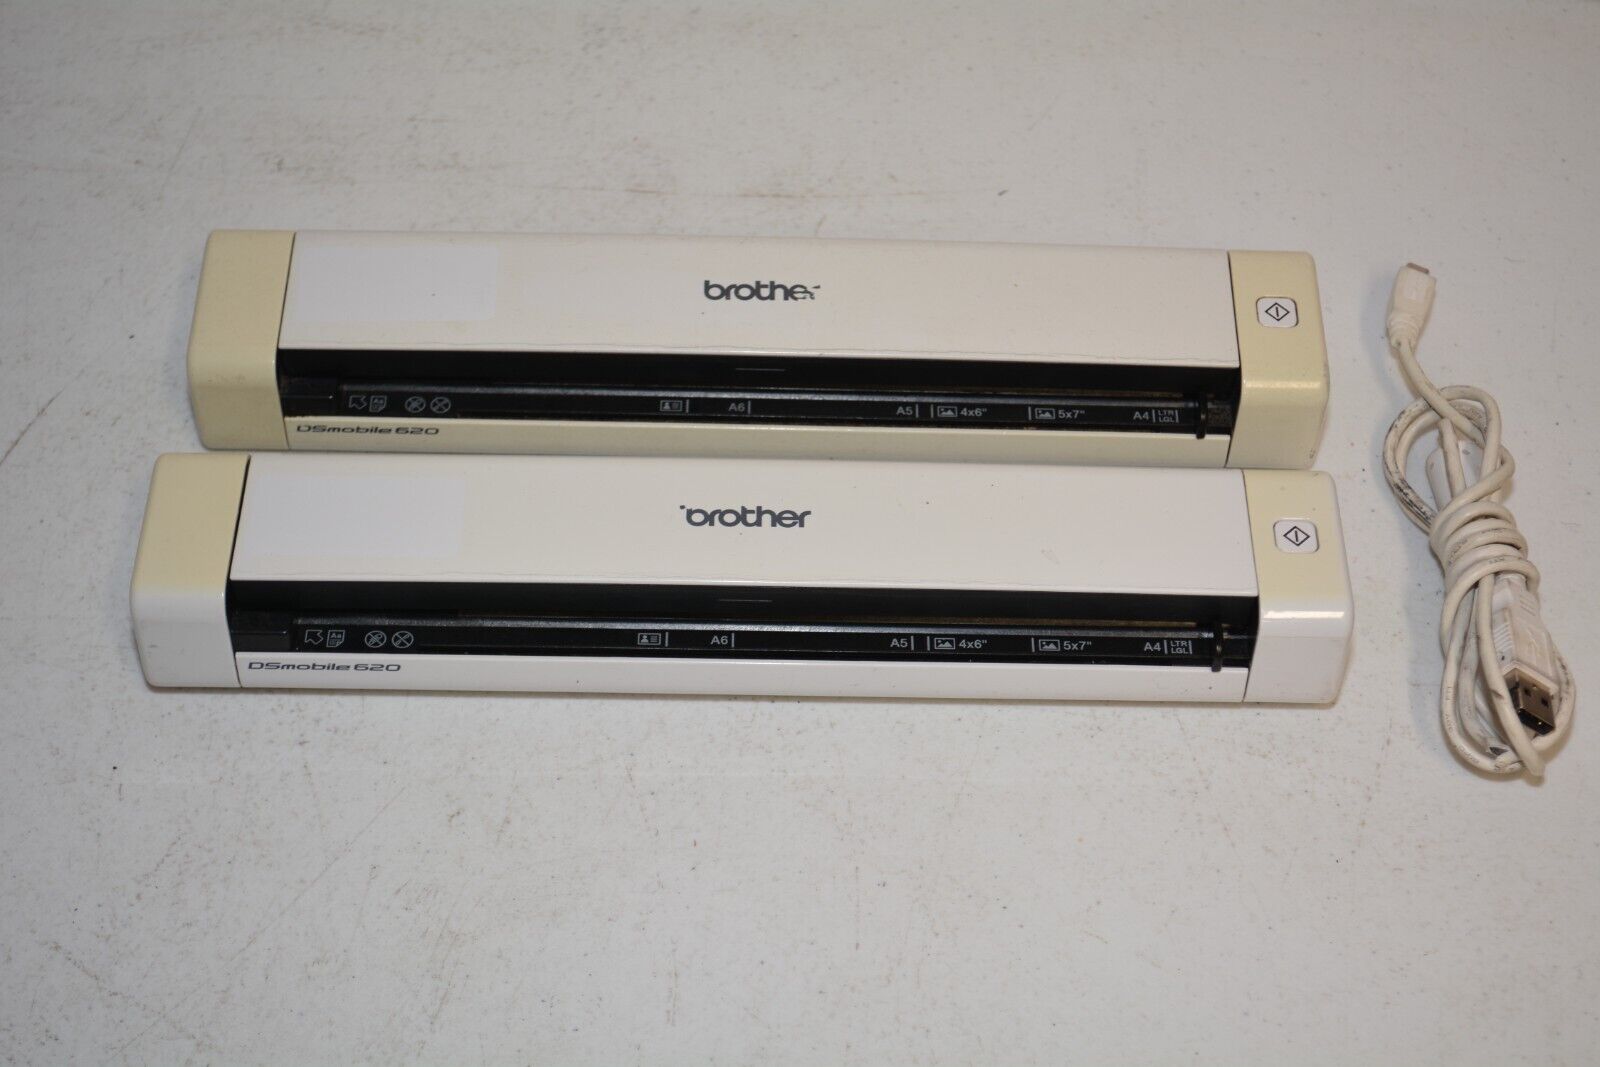 Lot 2x Brother DSMobile 620 Mobile USB Document Scanners #W5053